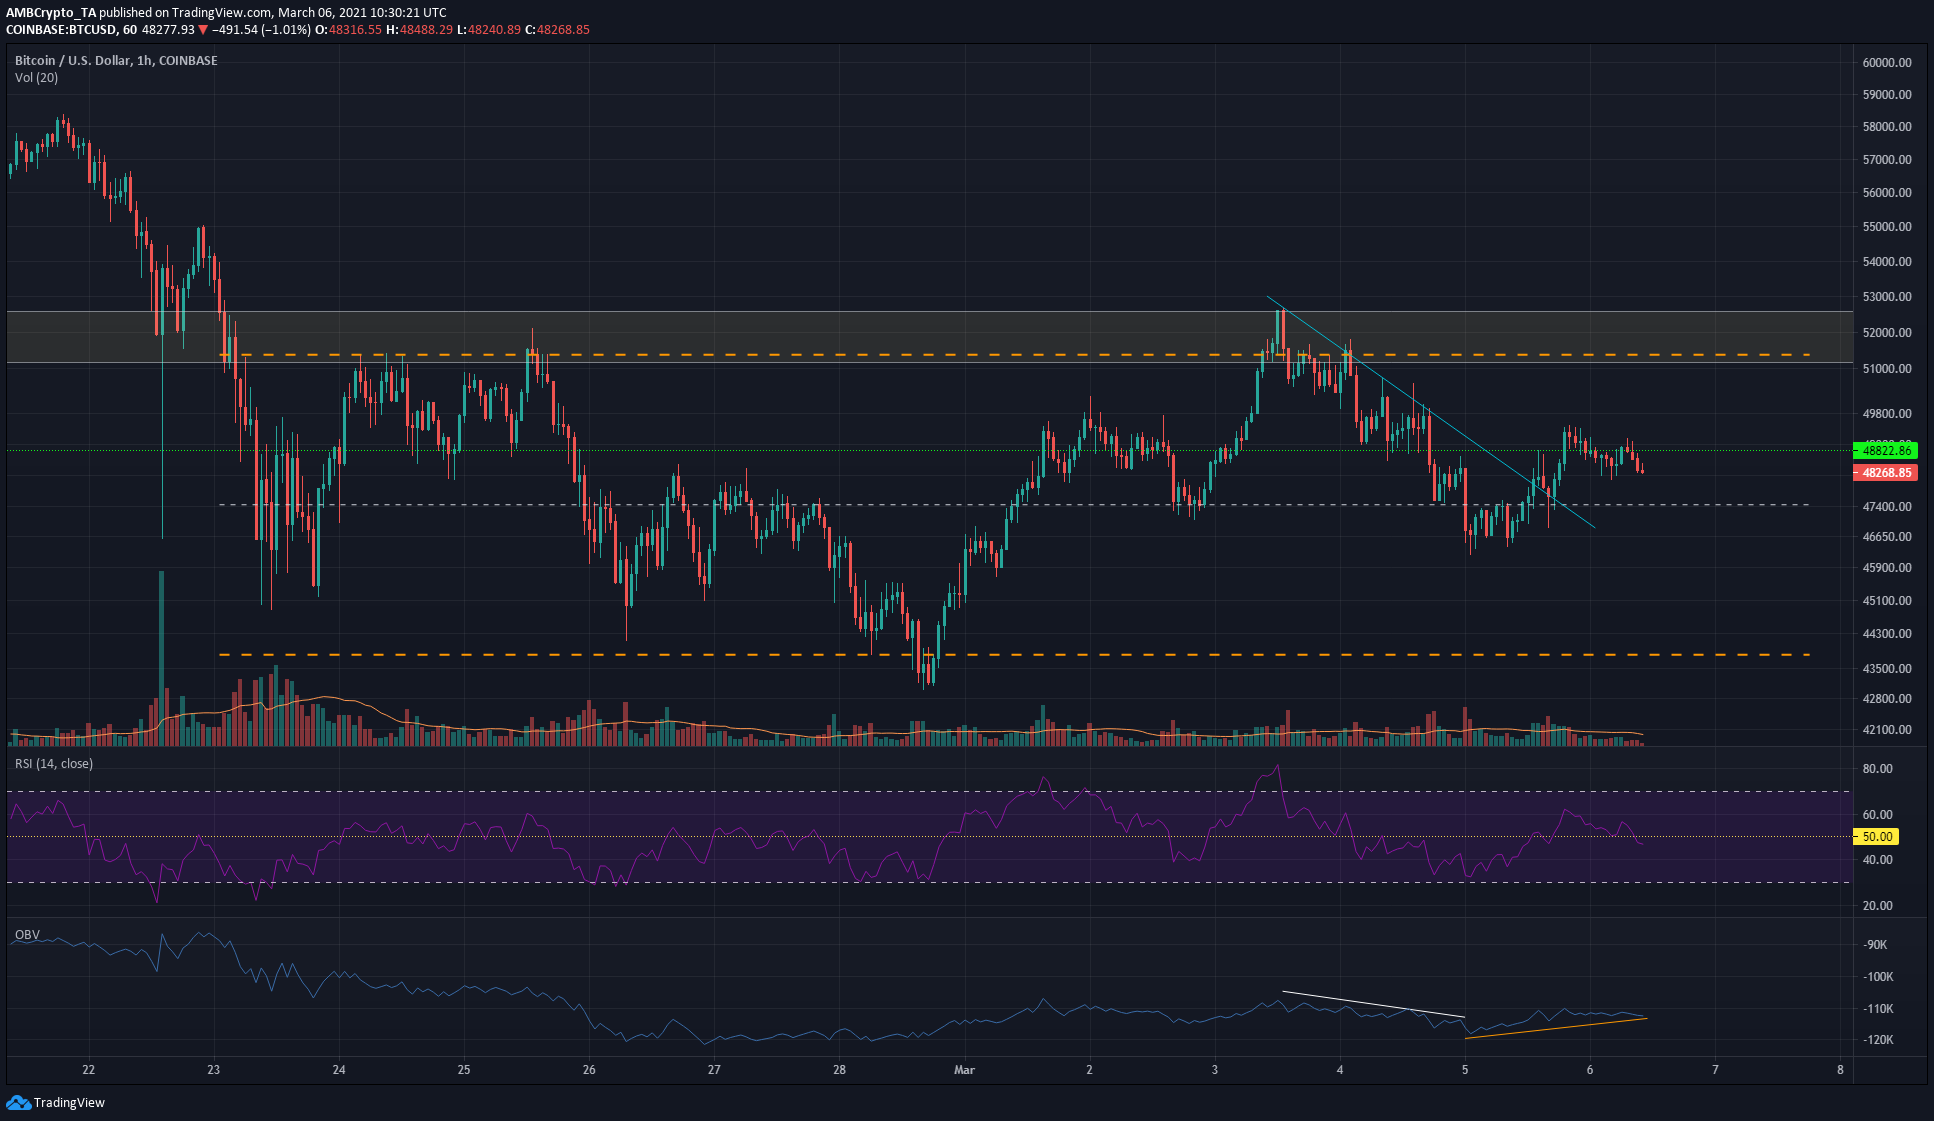 Bitcoin Price Analysis: 06 March 